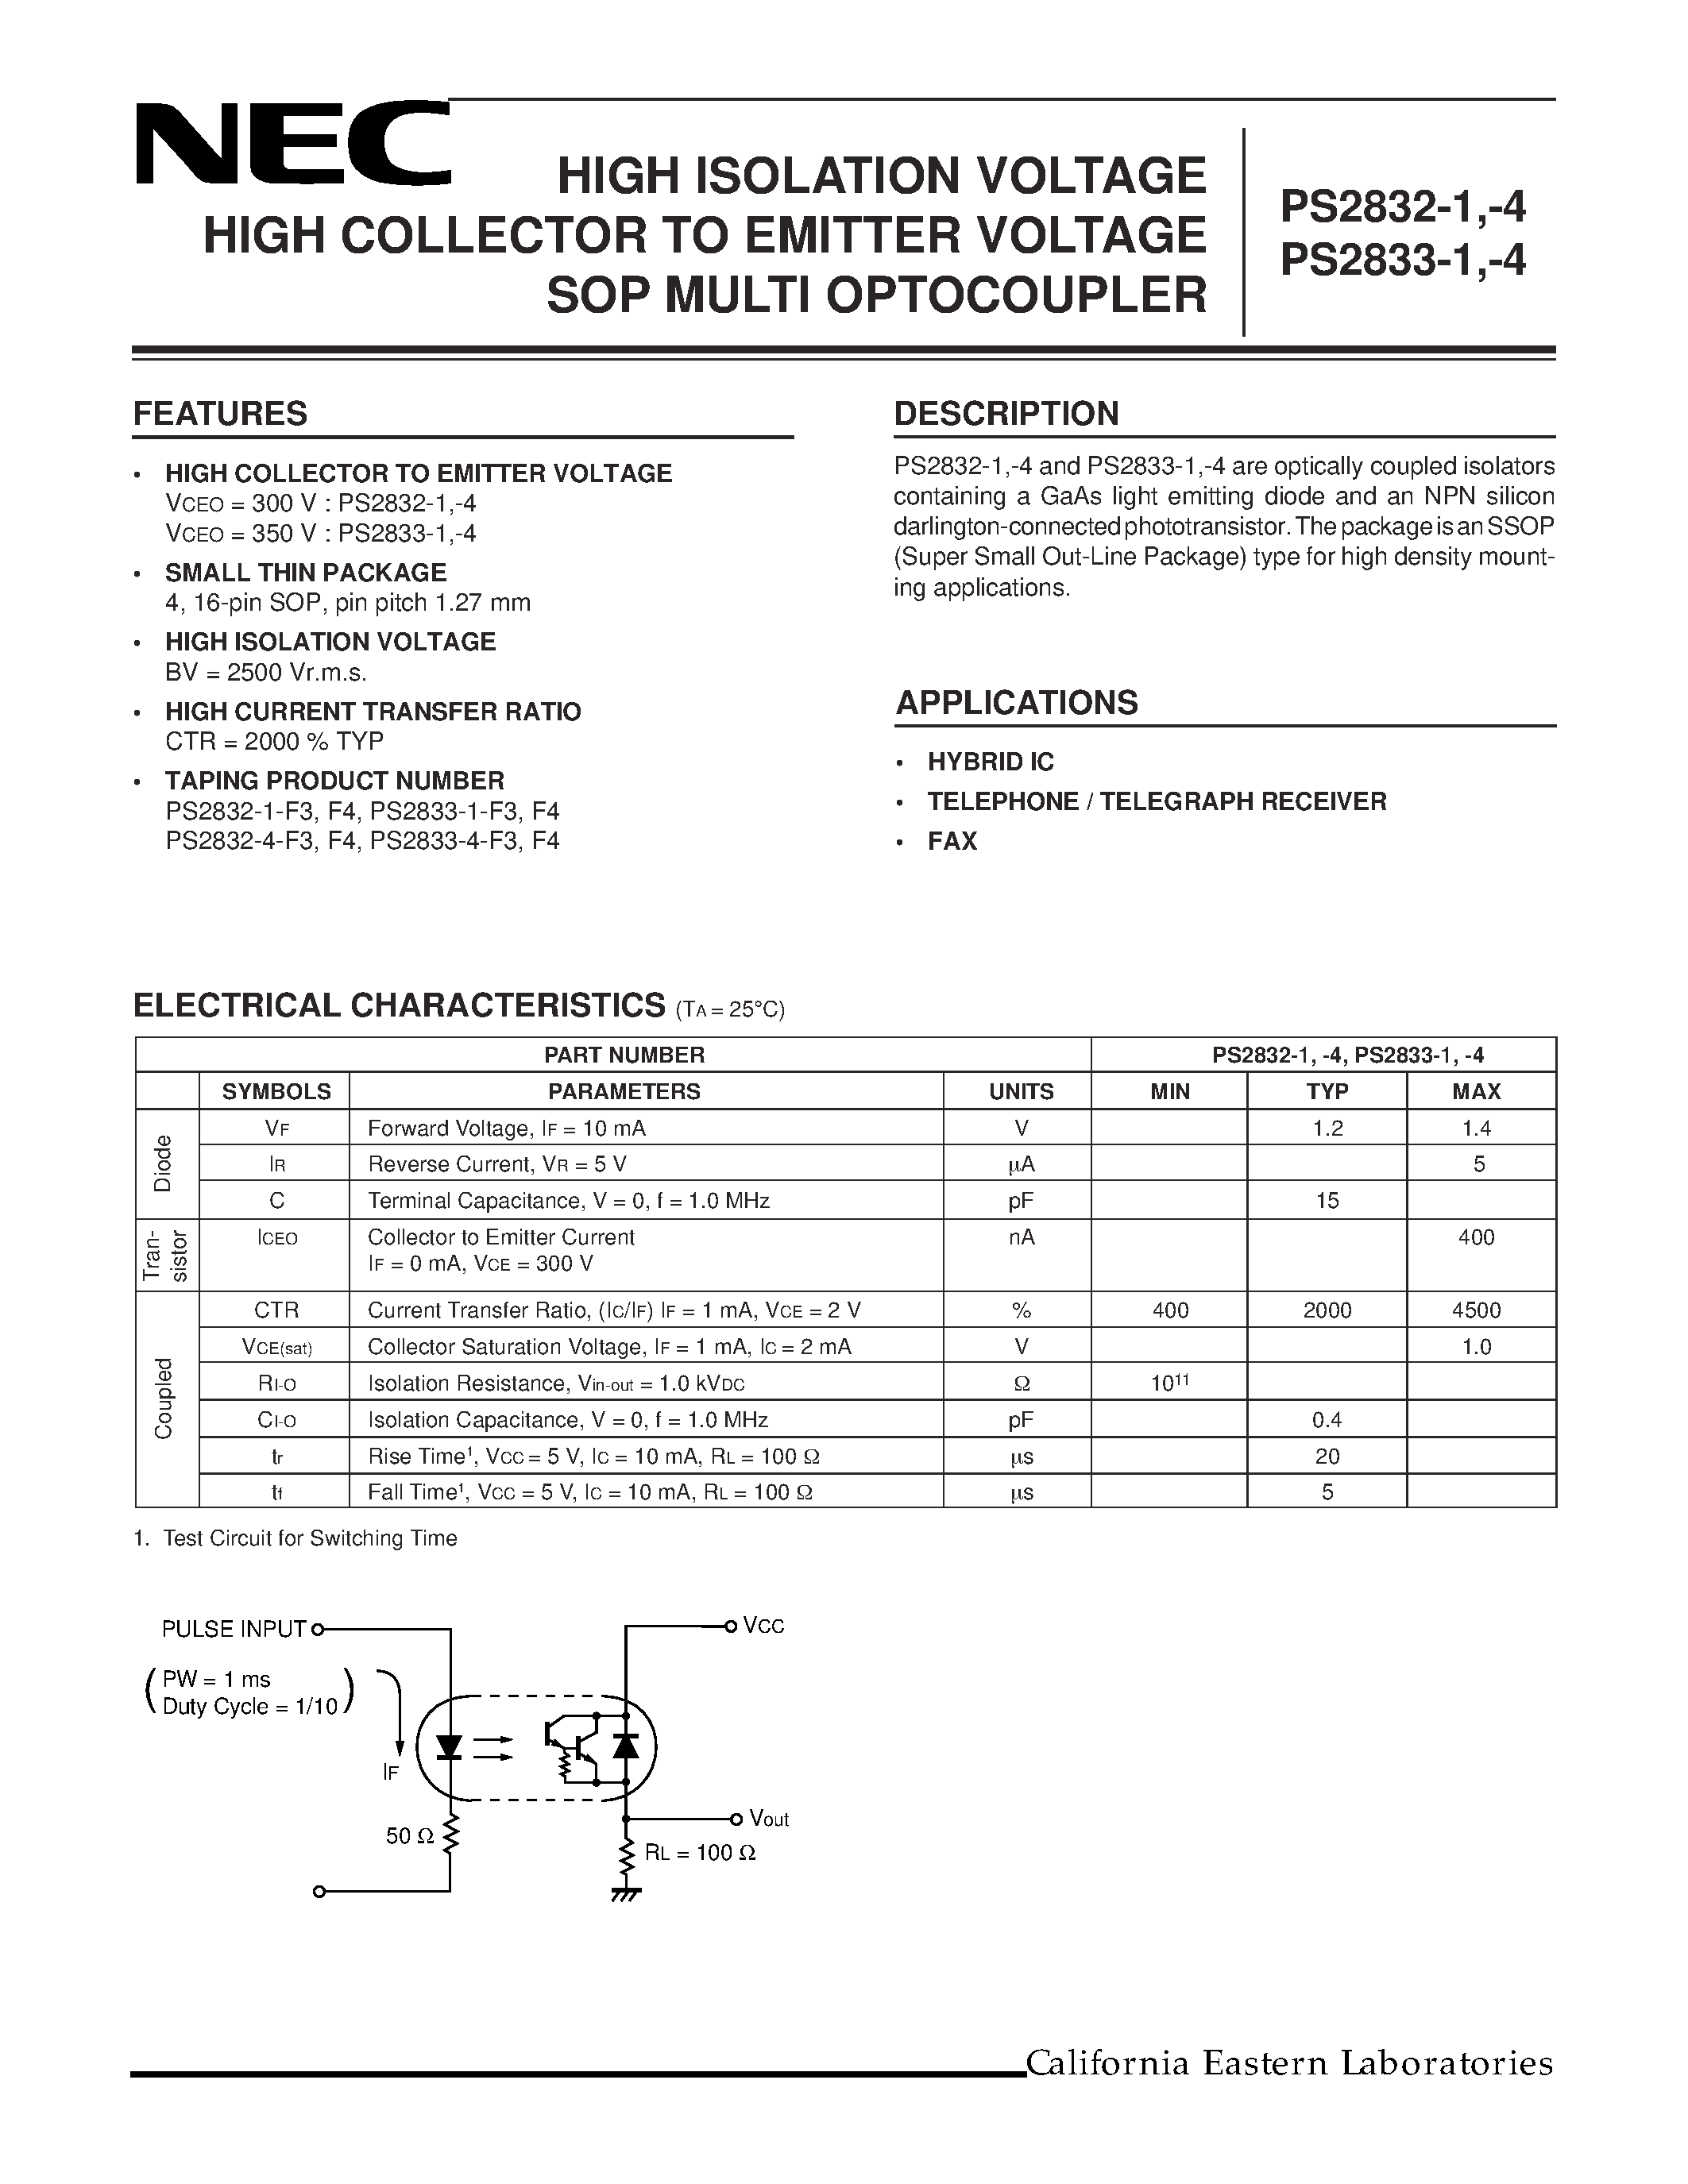 Datasheet PS2832-1-V-F4 - HIGH ISOLATION VOLTAGE HIGH COLLECTOR TO EMITTER VOLTAGE SOP MULTI OPTOCOUPLER page 1